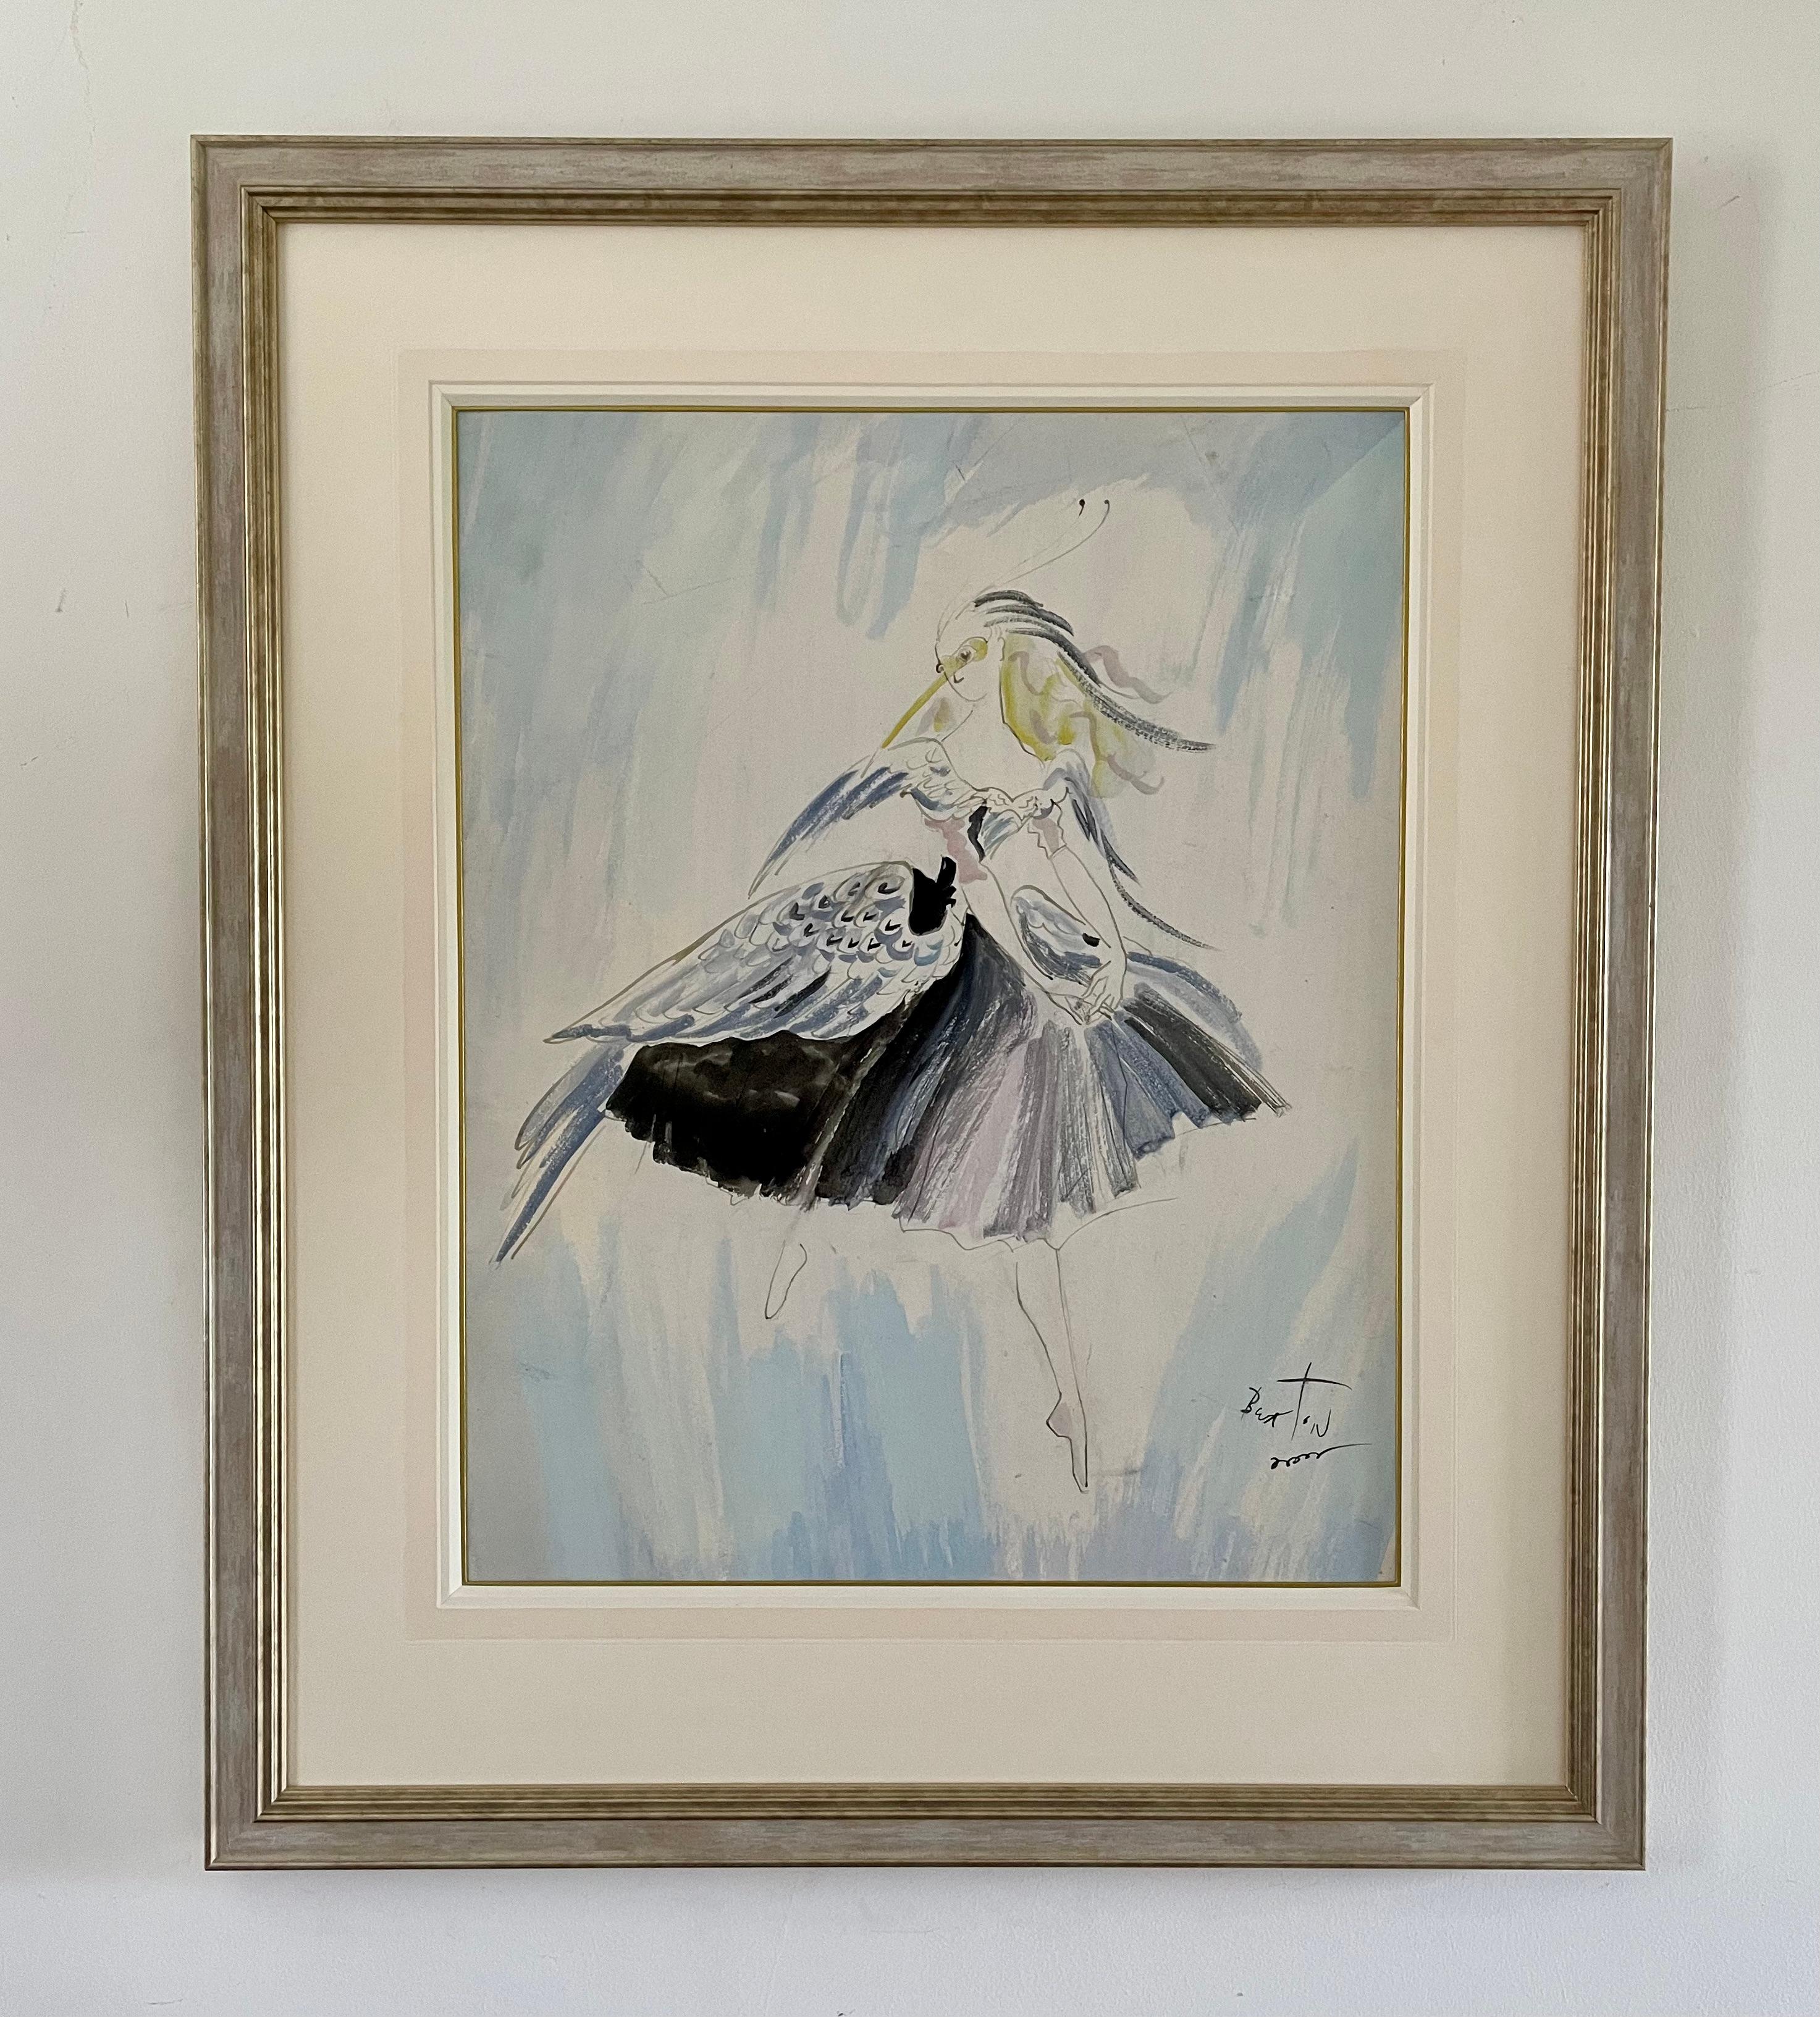 SIR CECIL BEATON, CBE
(1904-1980)

Ballet Costume Design for Le Pavillon - 1936

Signed l.r.: Beaton
Watercolour, bodycolour and ink

49 by 39 cm., 19 ¼ by 15 ½ in.
(frame size 70.5 by 60 cm., 27 ¾  by 23 ¾ in.)

Literature:
Cyril W Beaumont, Design